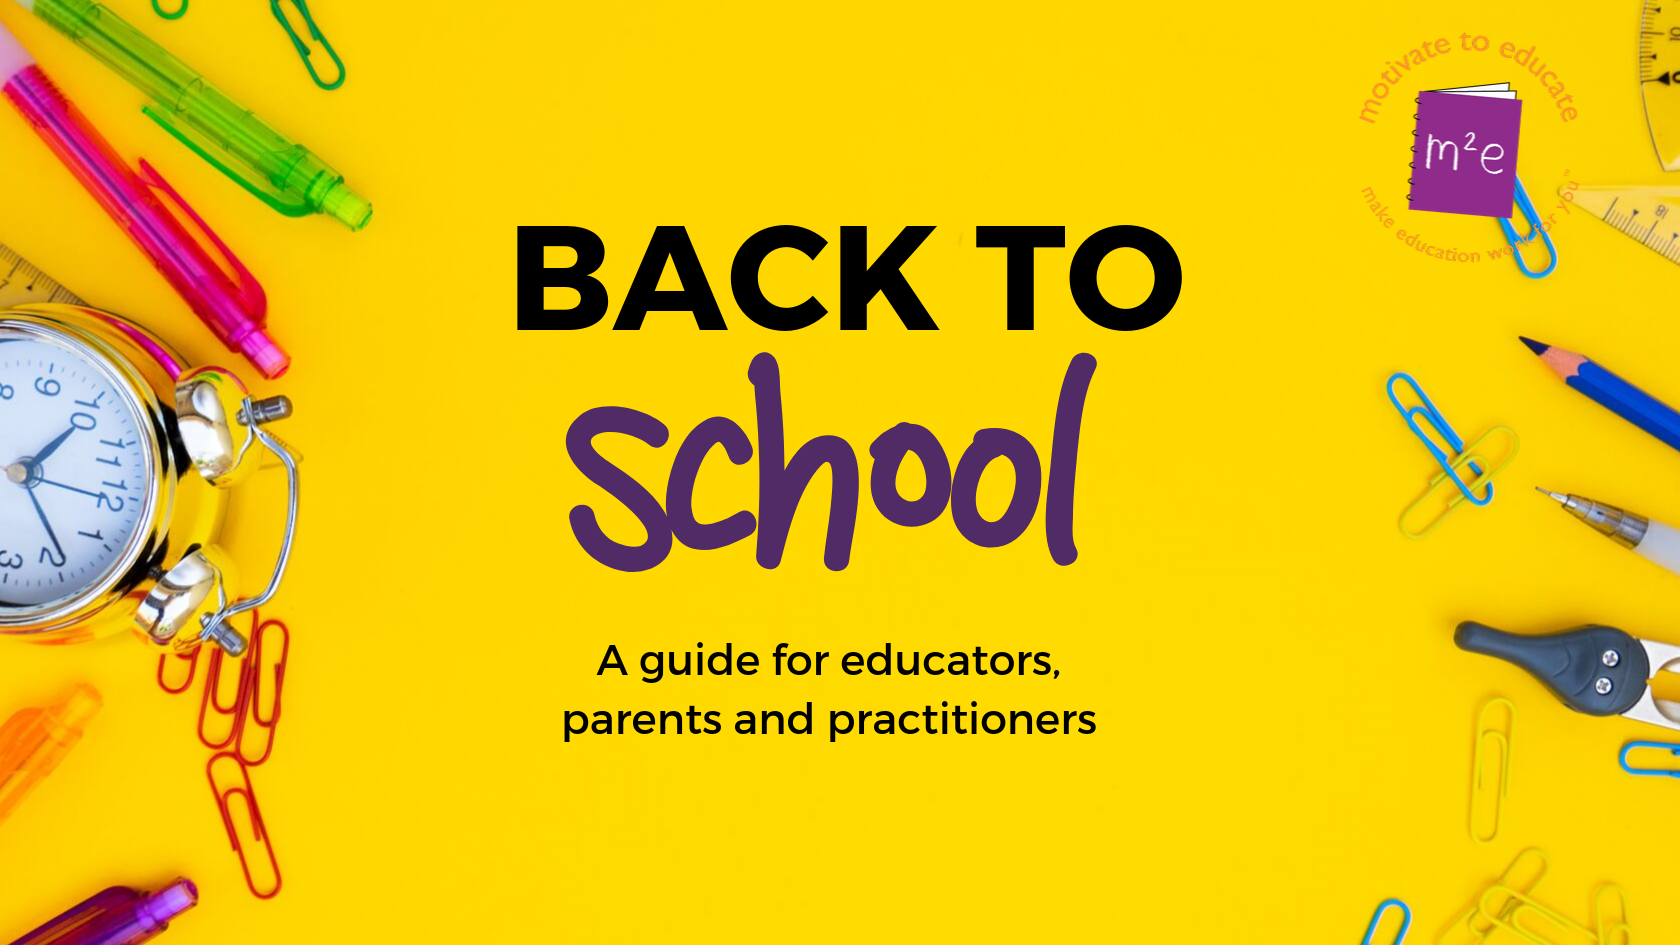 How to support your child as they start secondary school